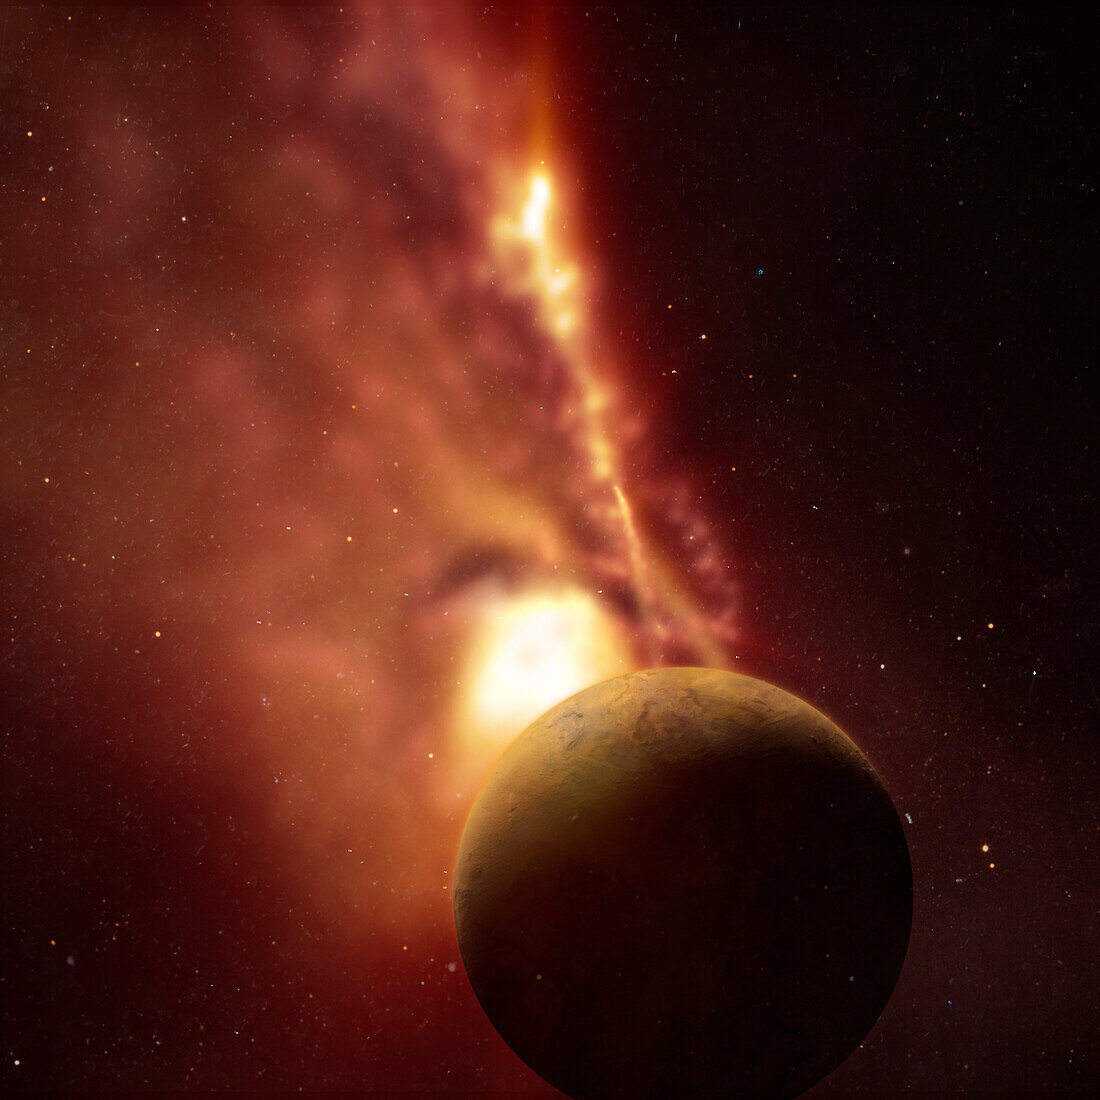 Exoplanet orbiting new star, composite image